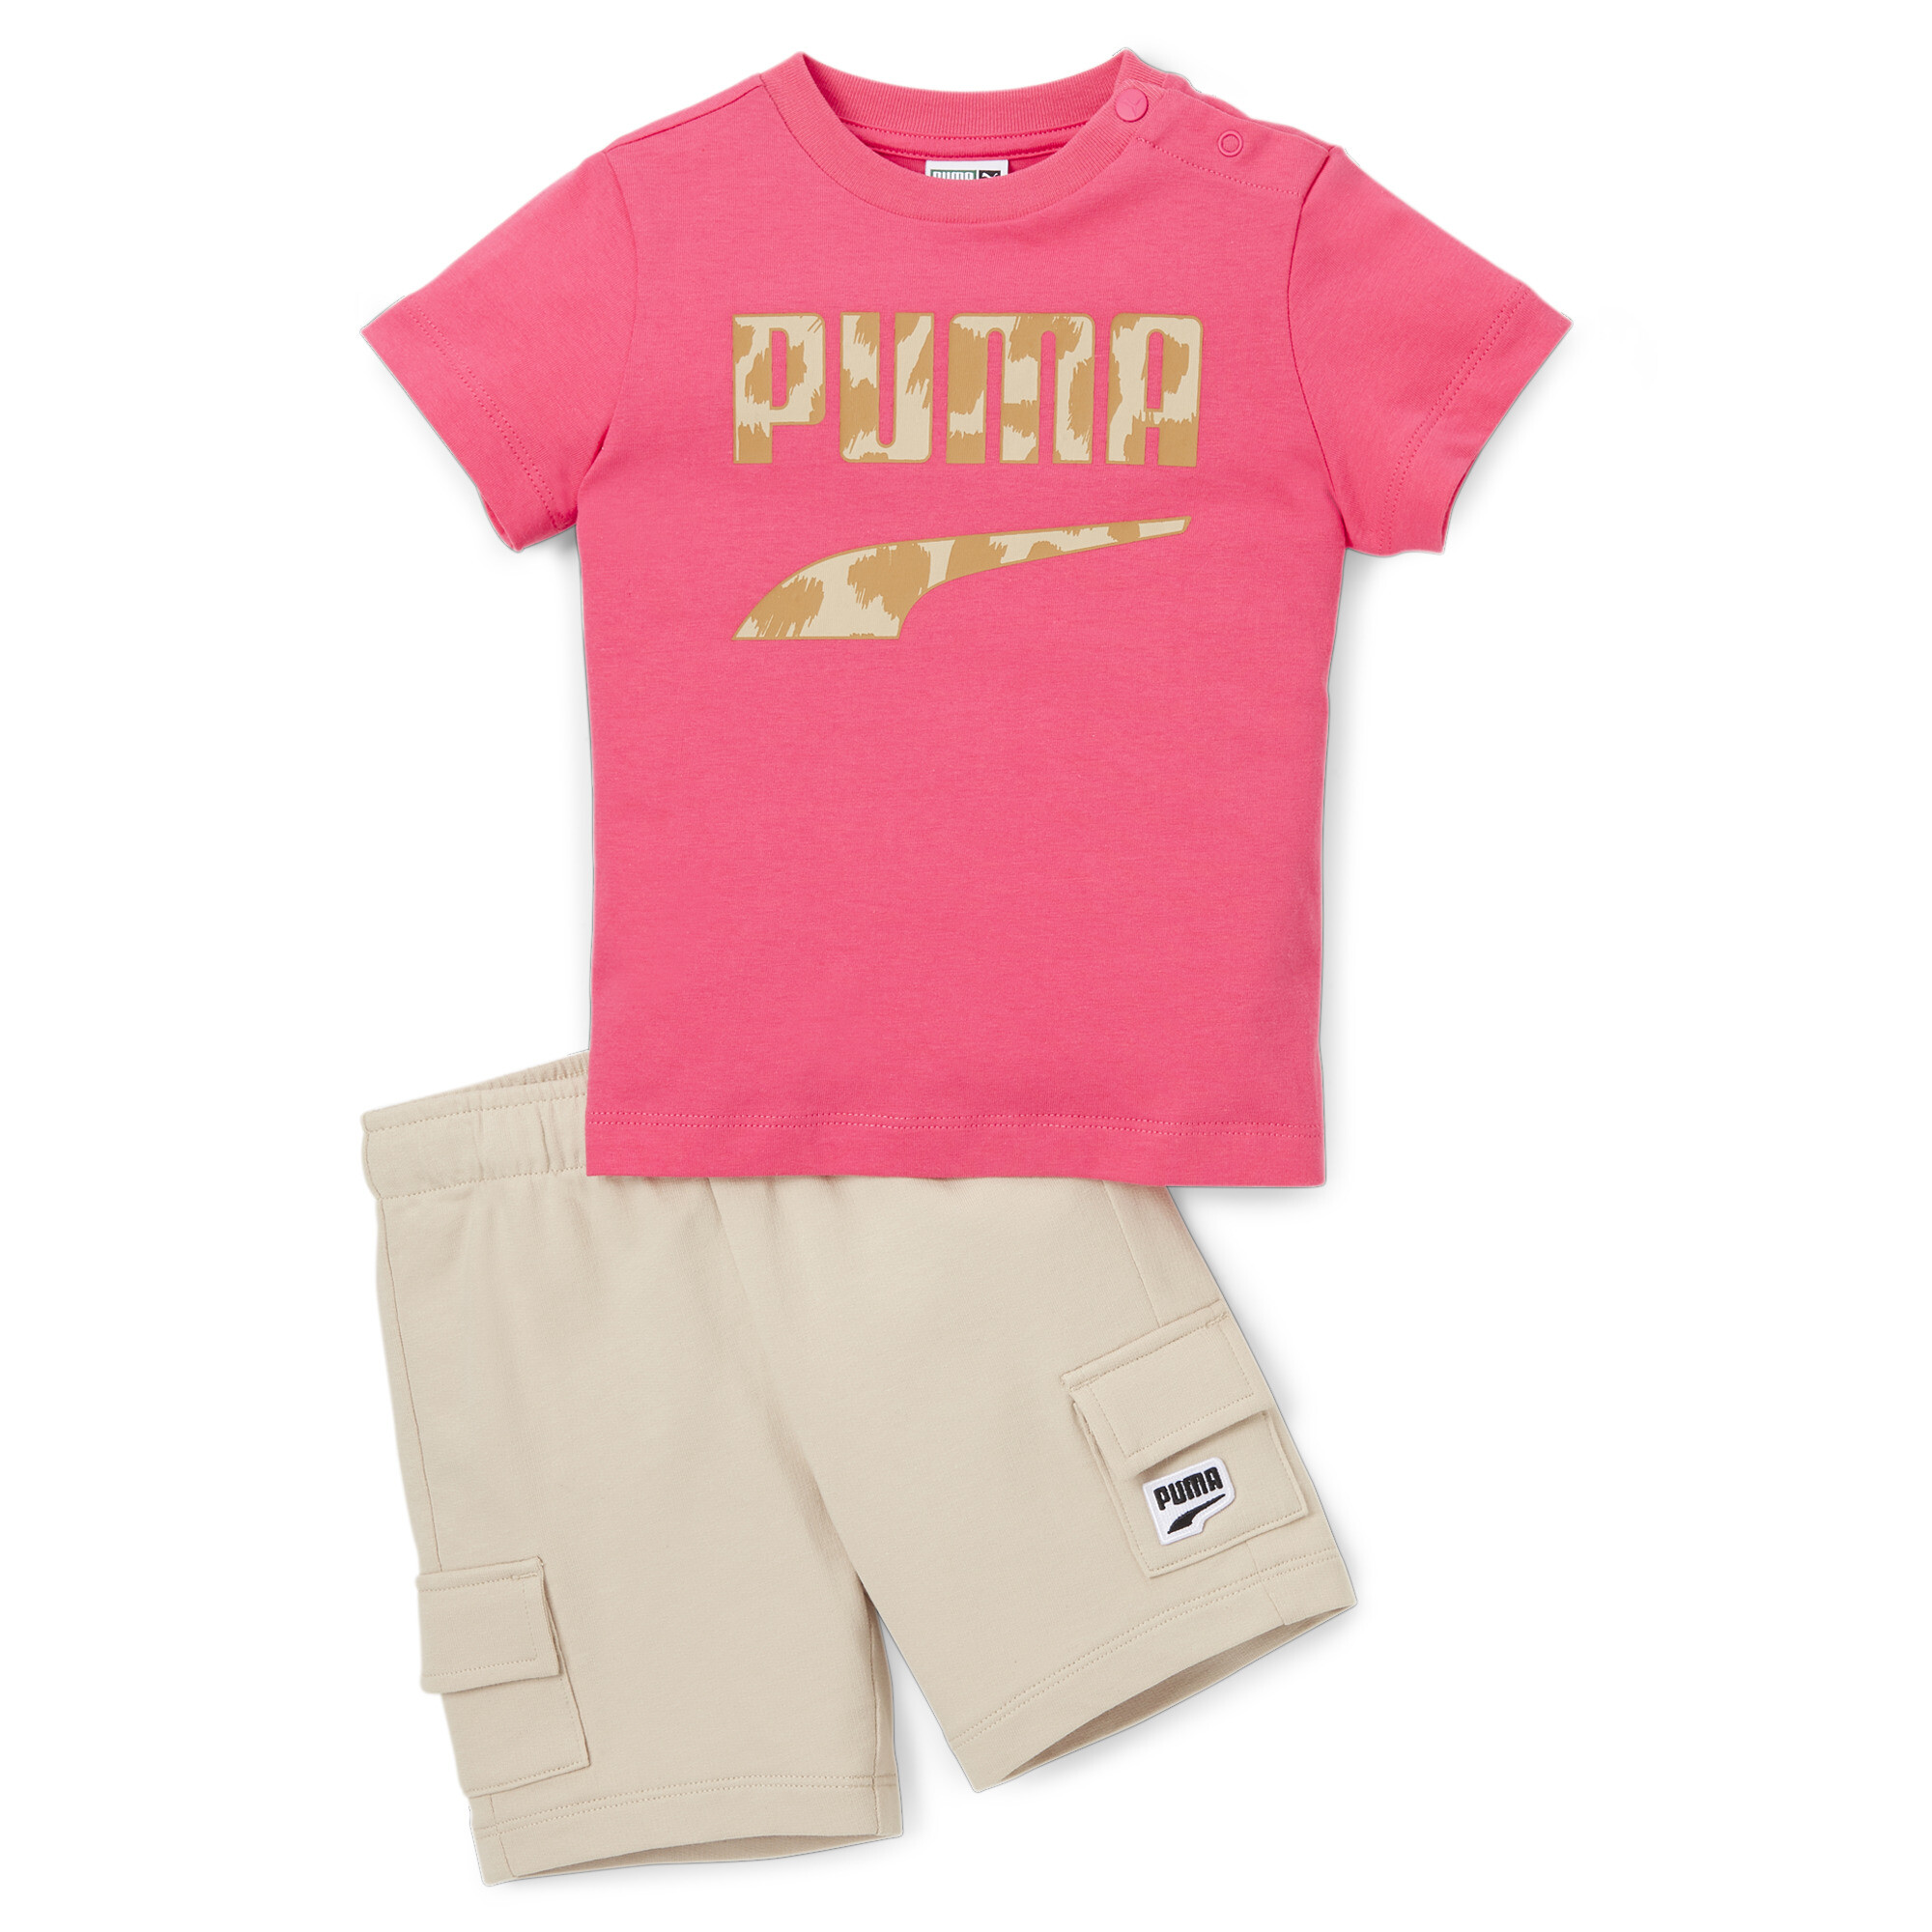 Kids' PUMA Minicats Downtown Set Baby In Pink, Size 4-6 Months